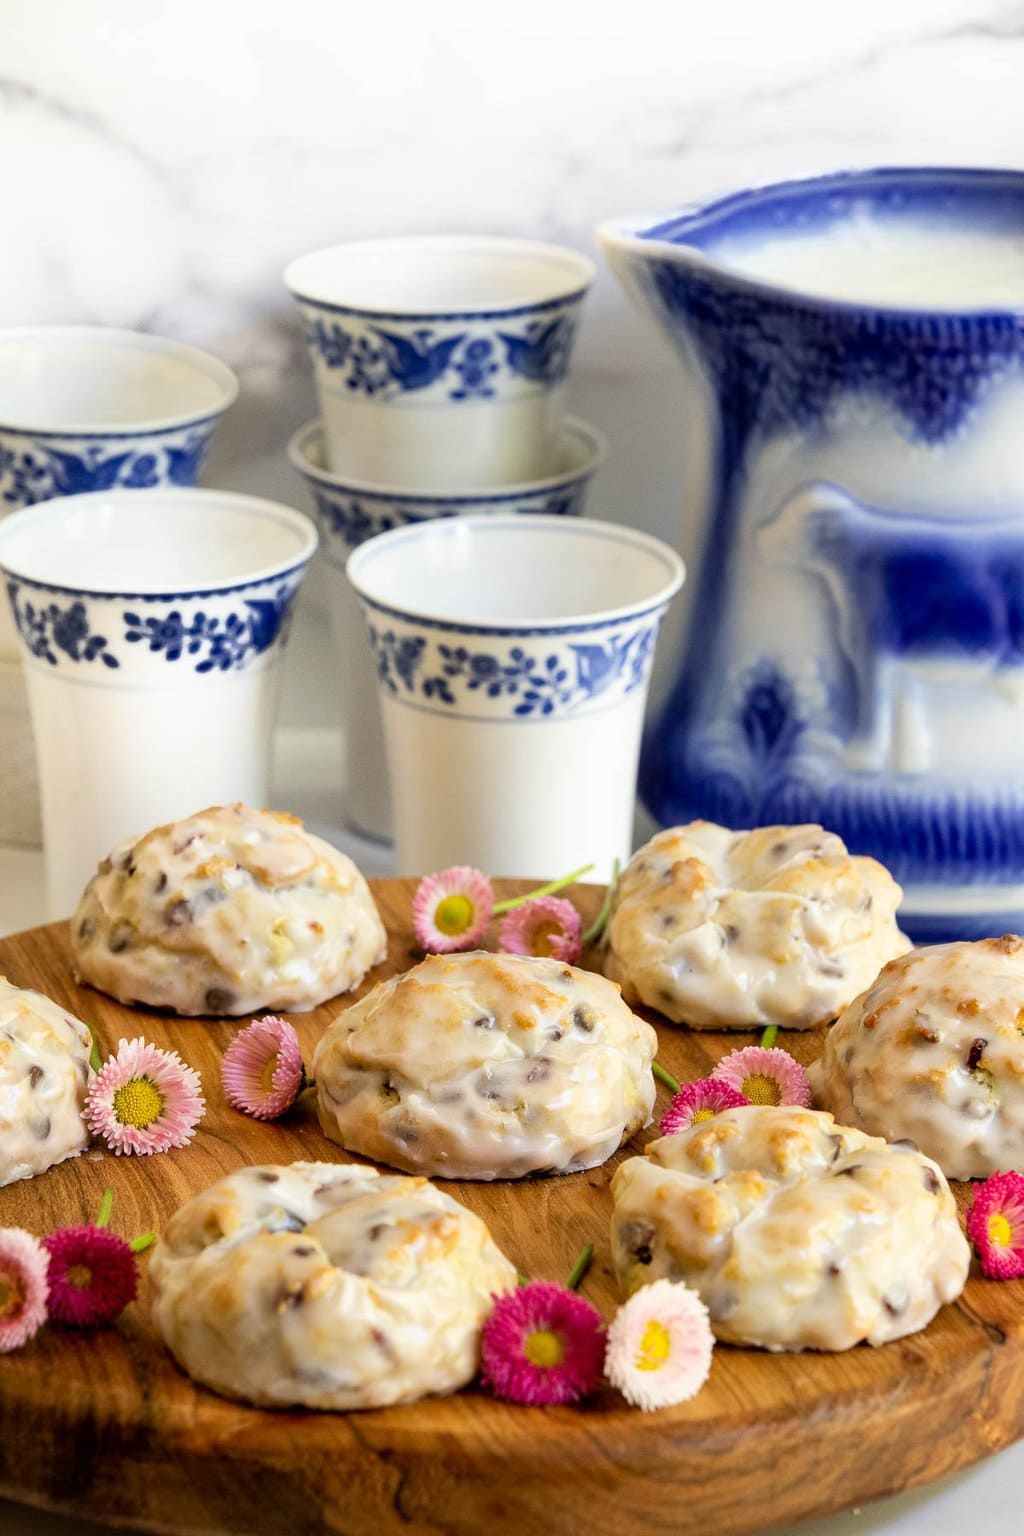 Vertical photo of Ridiculously Easy Chocolate Chip Cherry Scones on a wooden serving board with glasses of milk in blue and white patterned cups in the background.